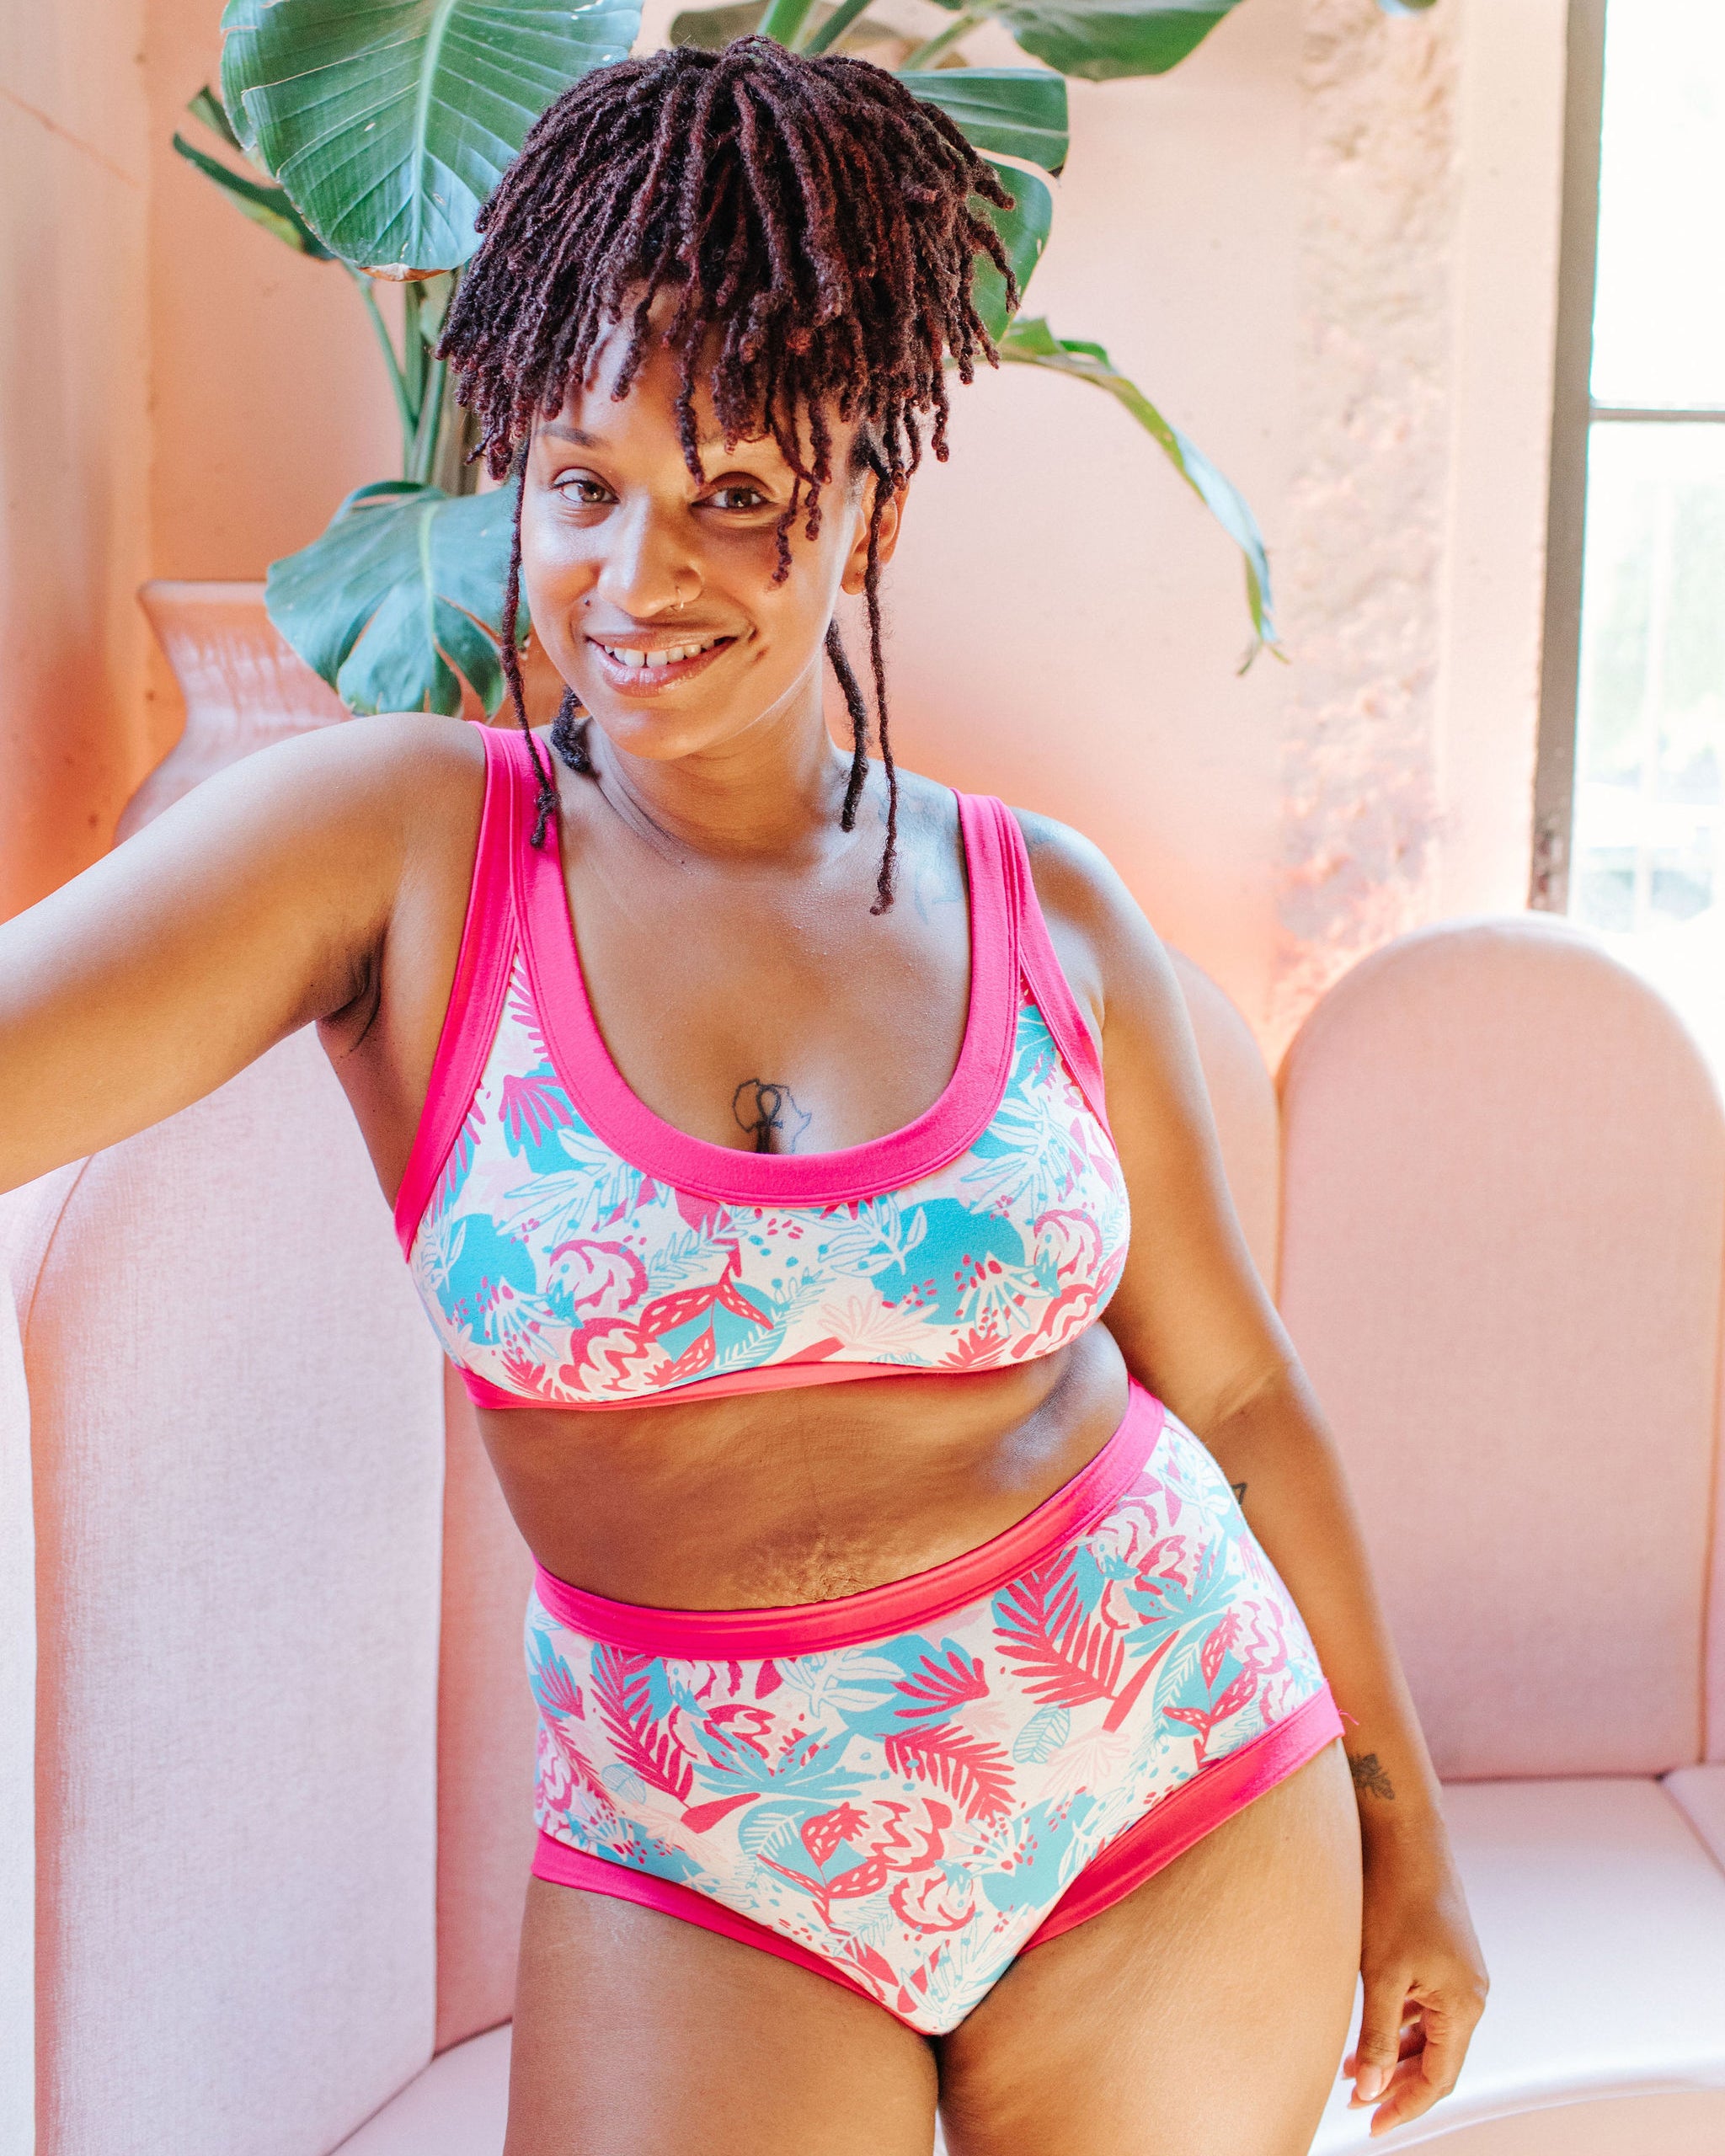 Model wearing a set of Thunderpants Original style underwear and Bralette in Finding Flamingos - pink and blue Miami-inspired print.